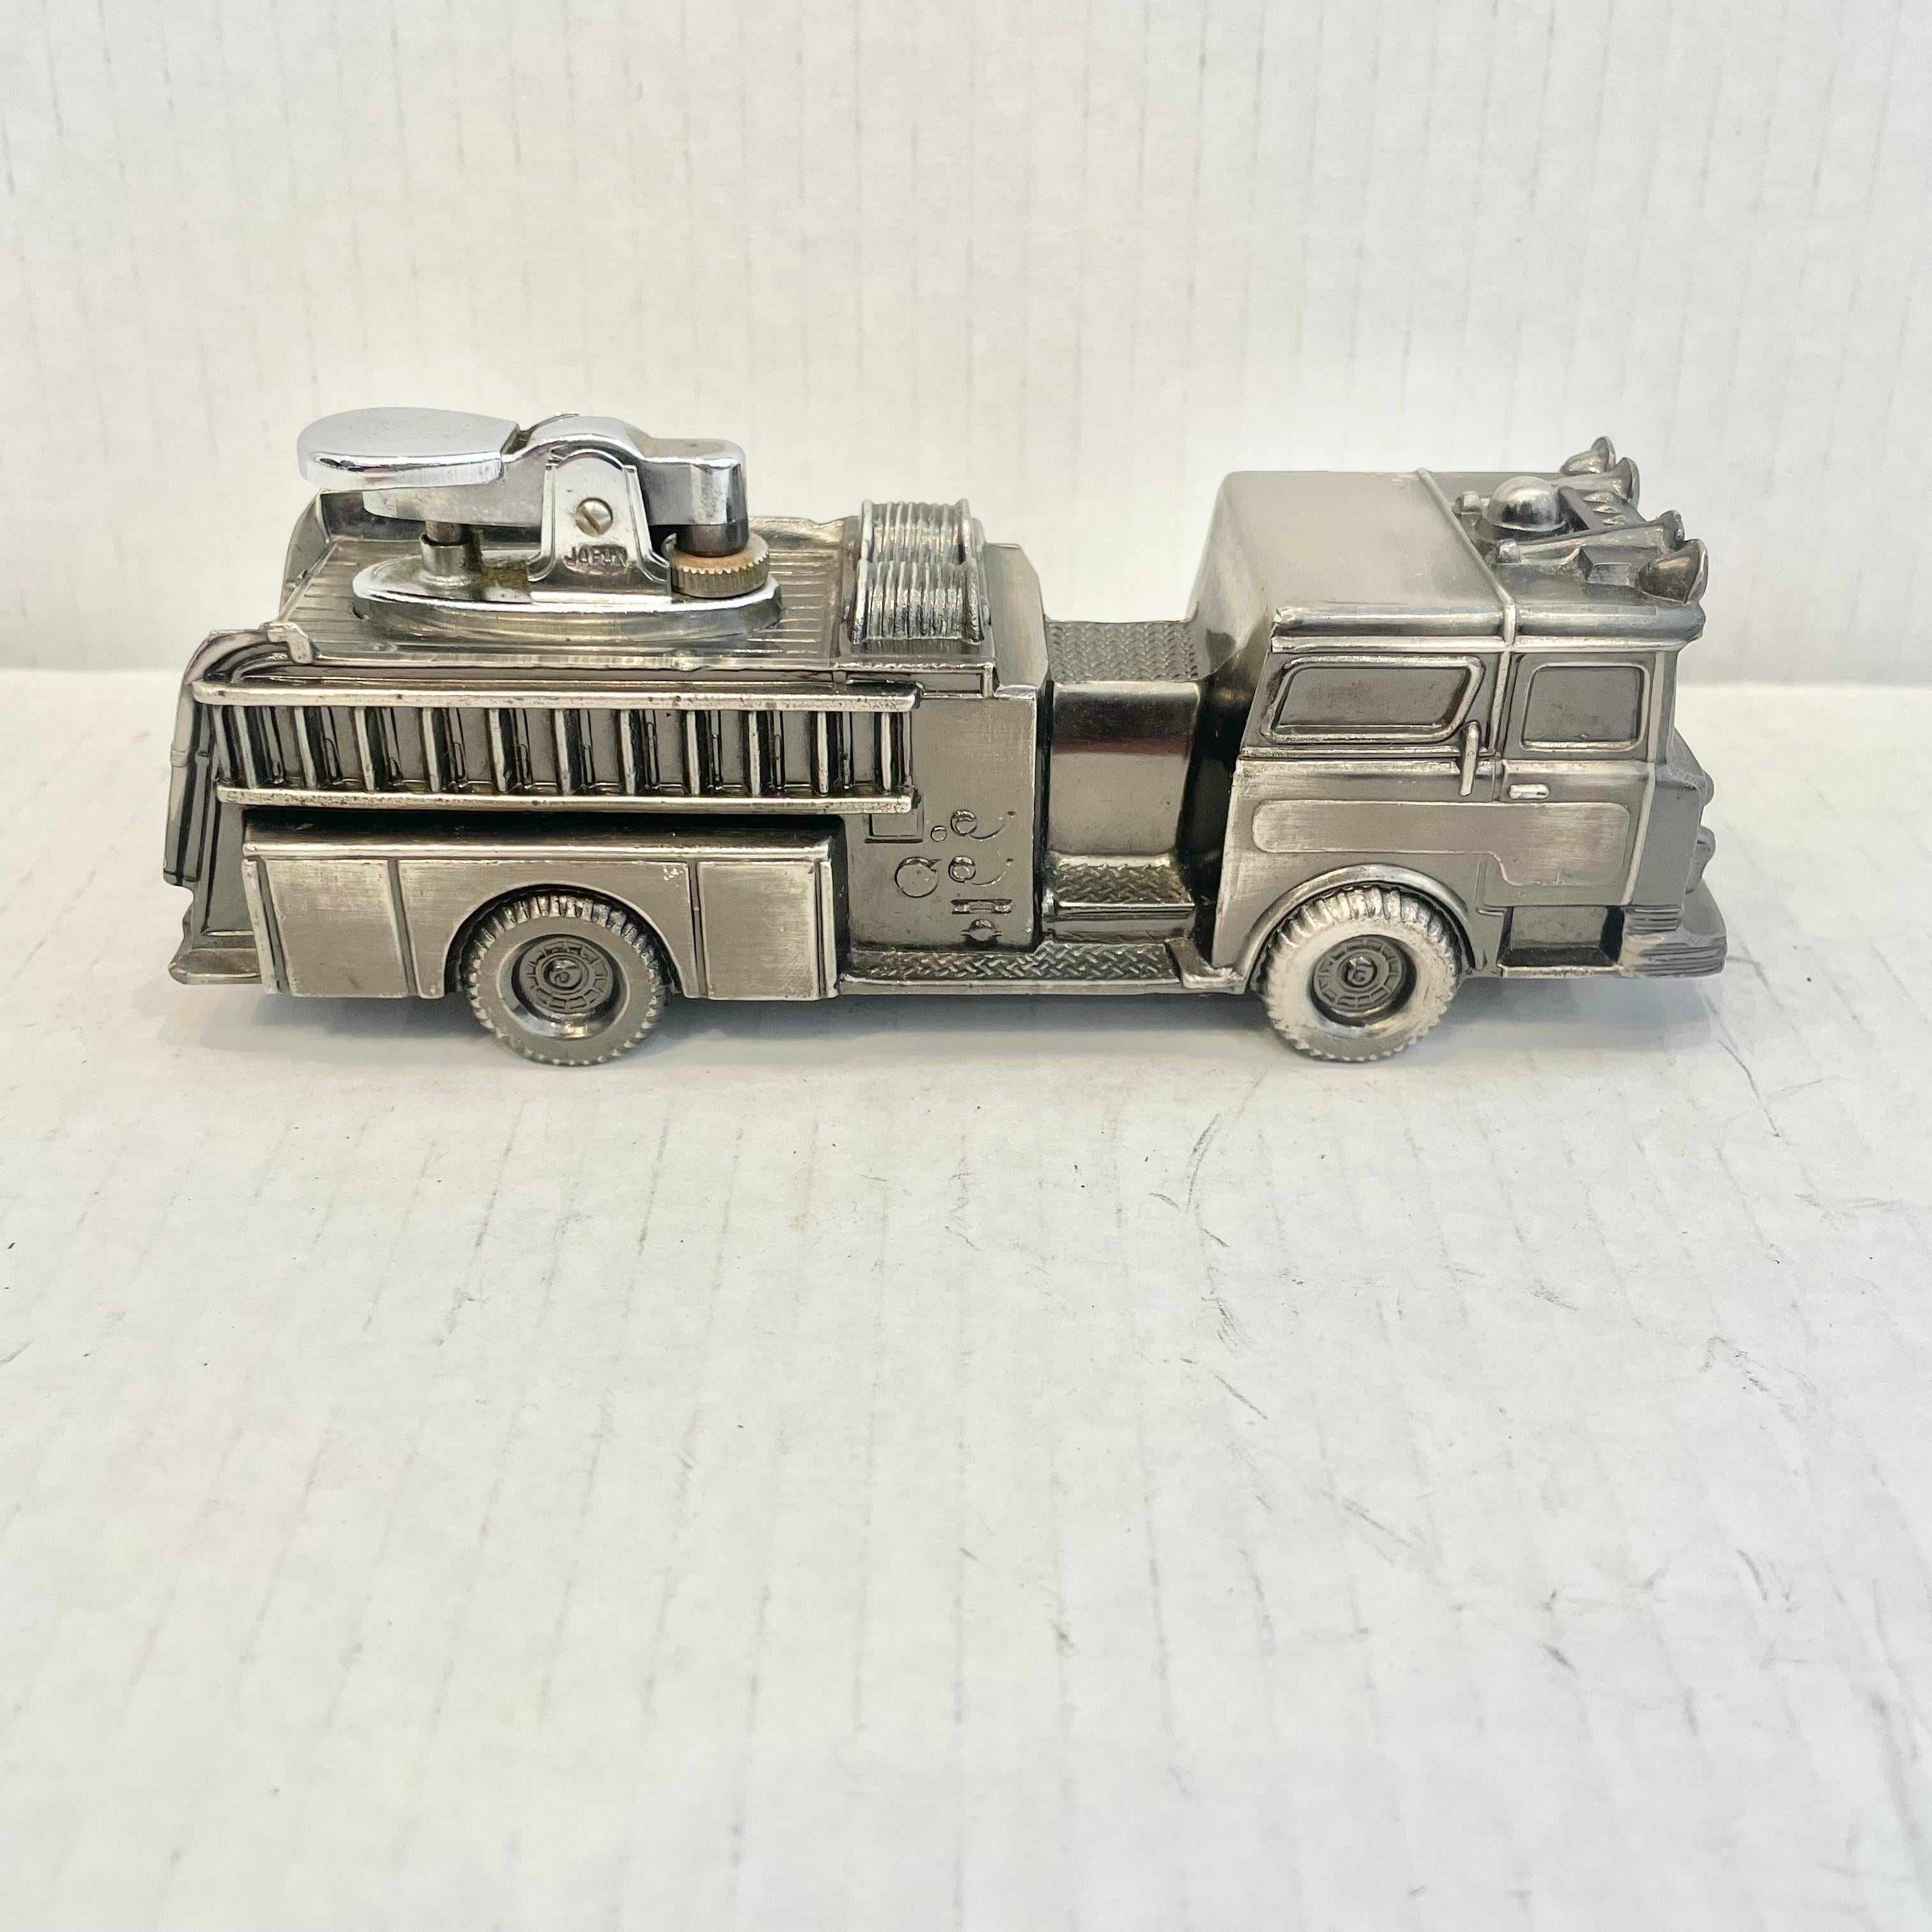 Cool vintage table lighter in the shape of a fire engine. Made completely of metal with a hollow body. Beautiful burnished silver color with intricate details. Cool tobacco accessory and conversation piece. Working lighter. Very unusual piece. Made